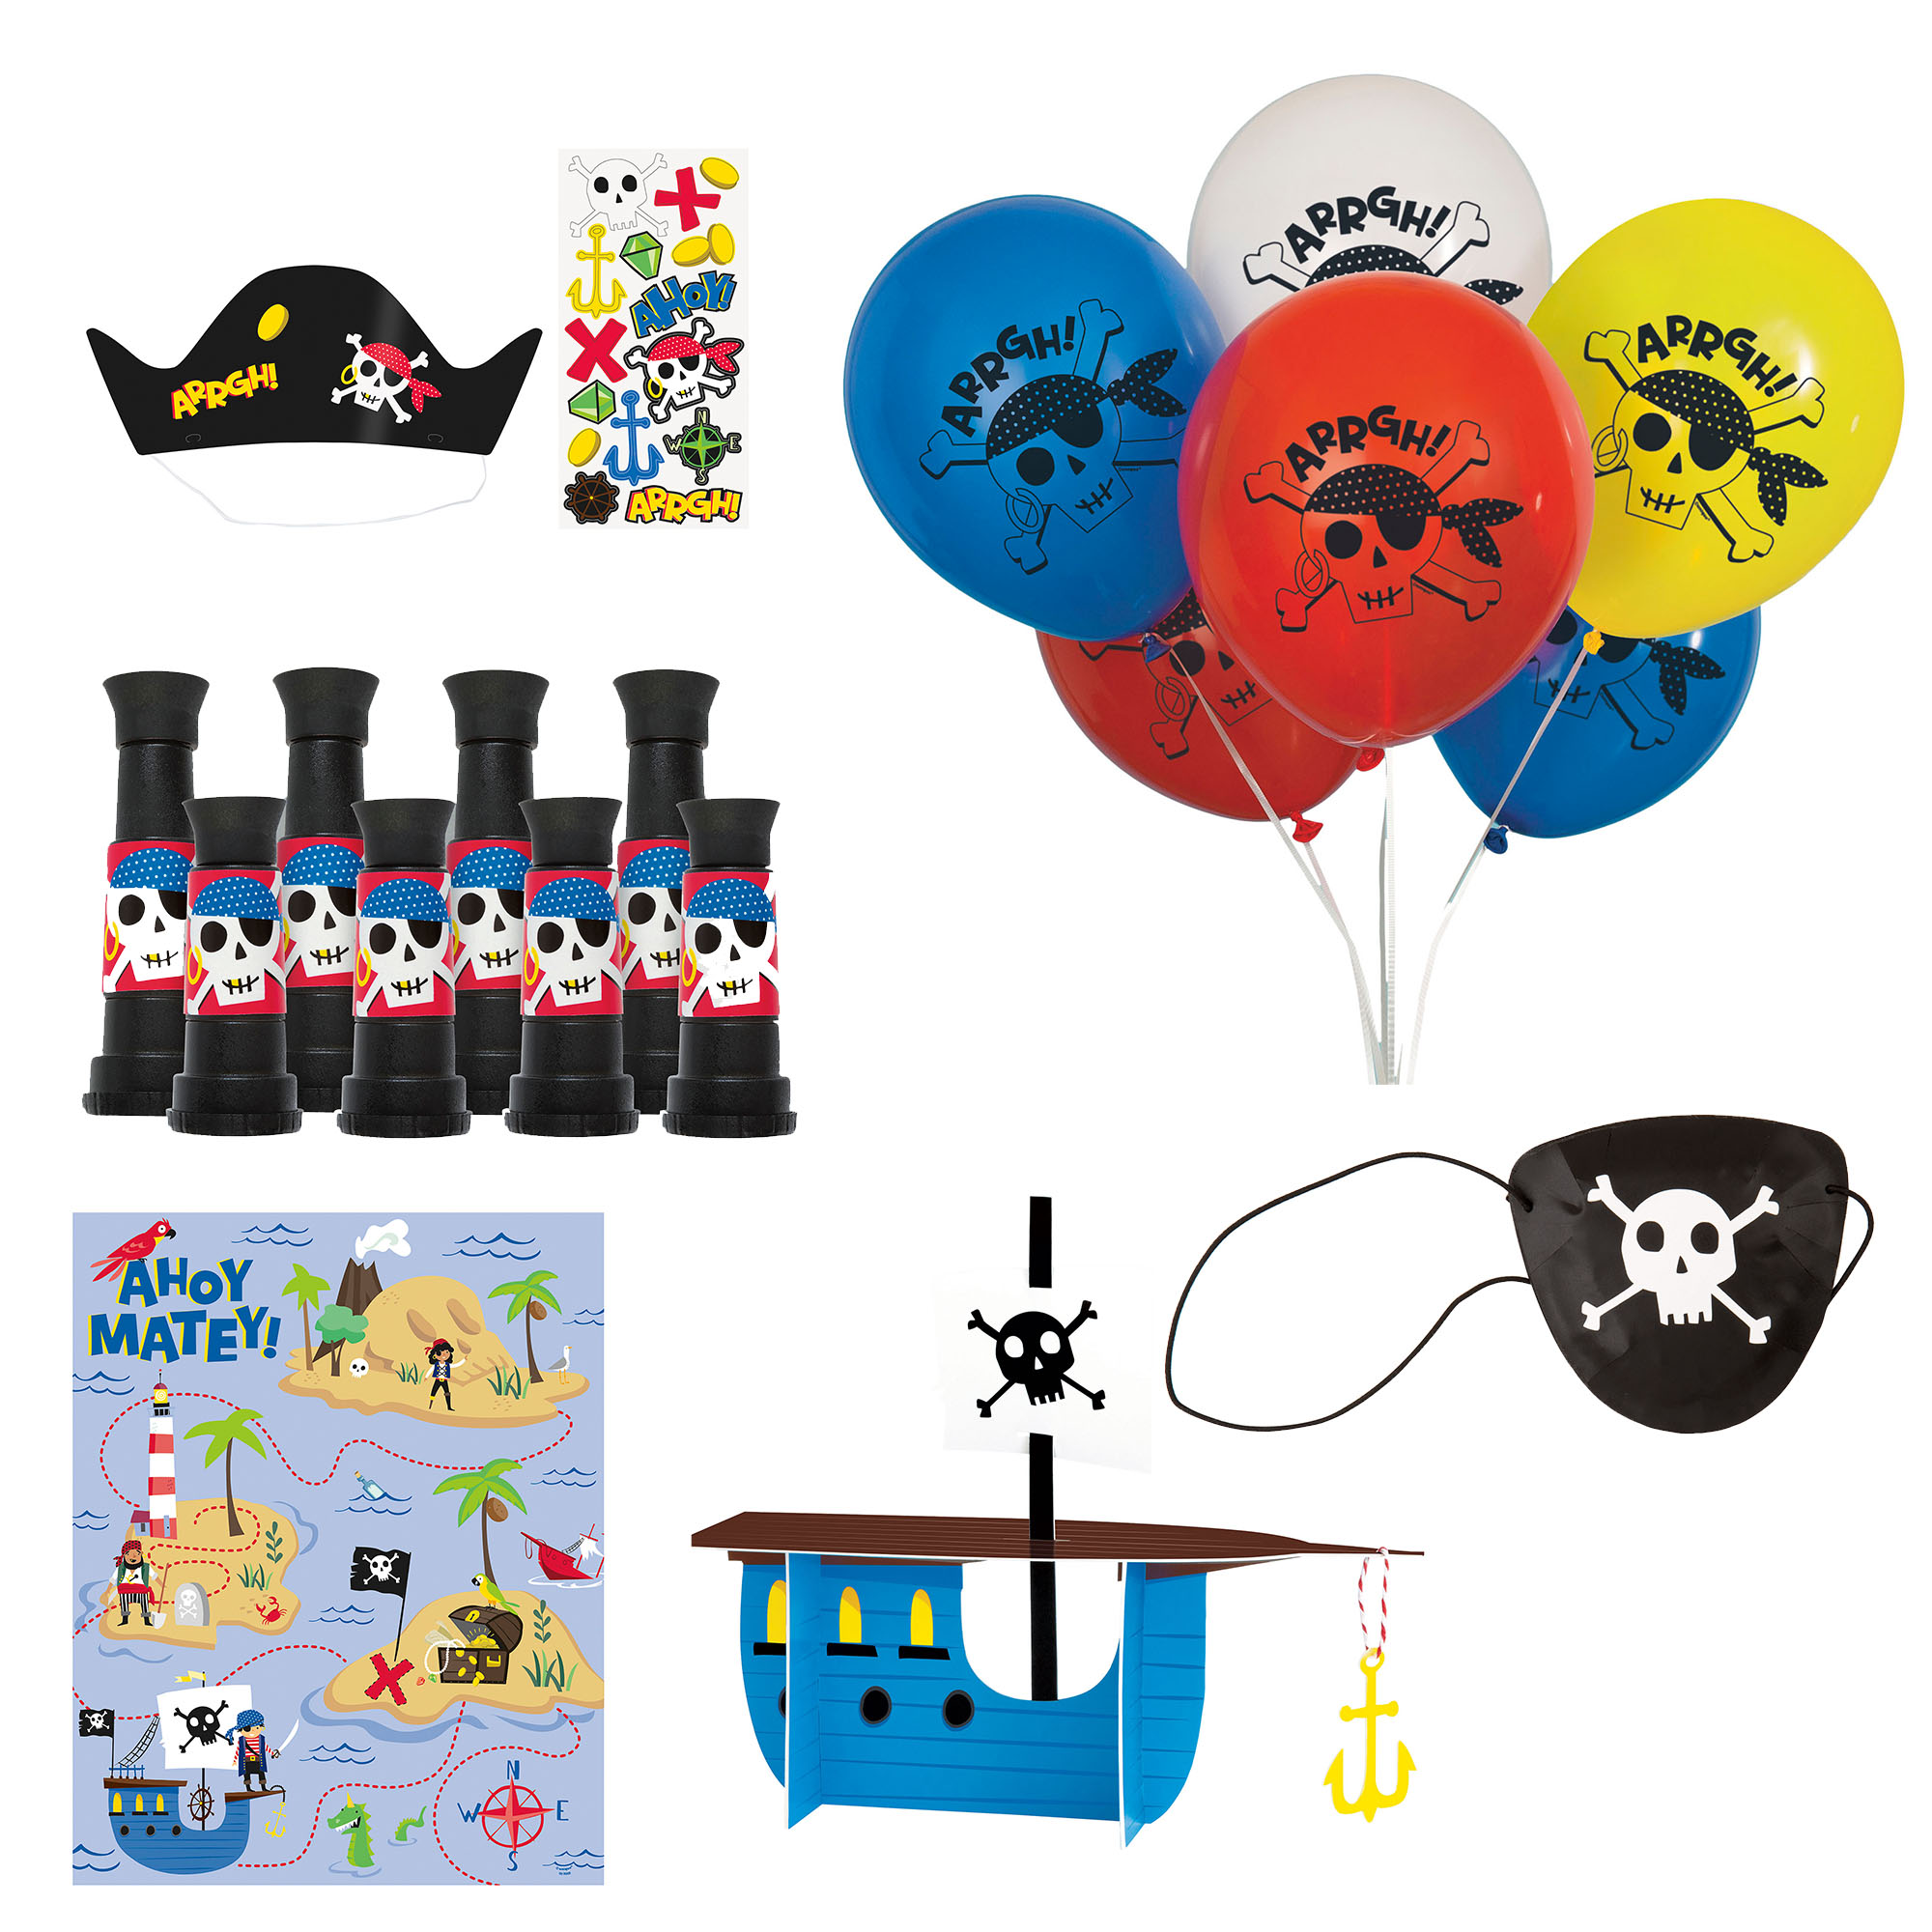 Ahoy Pirate Party Accessories Kit